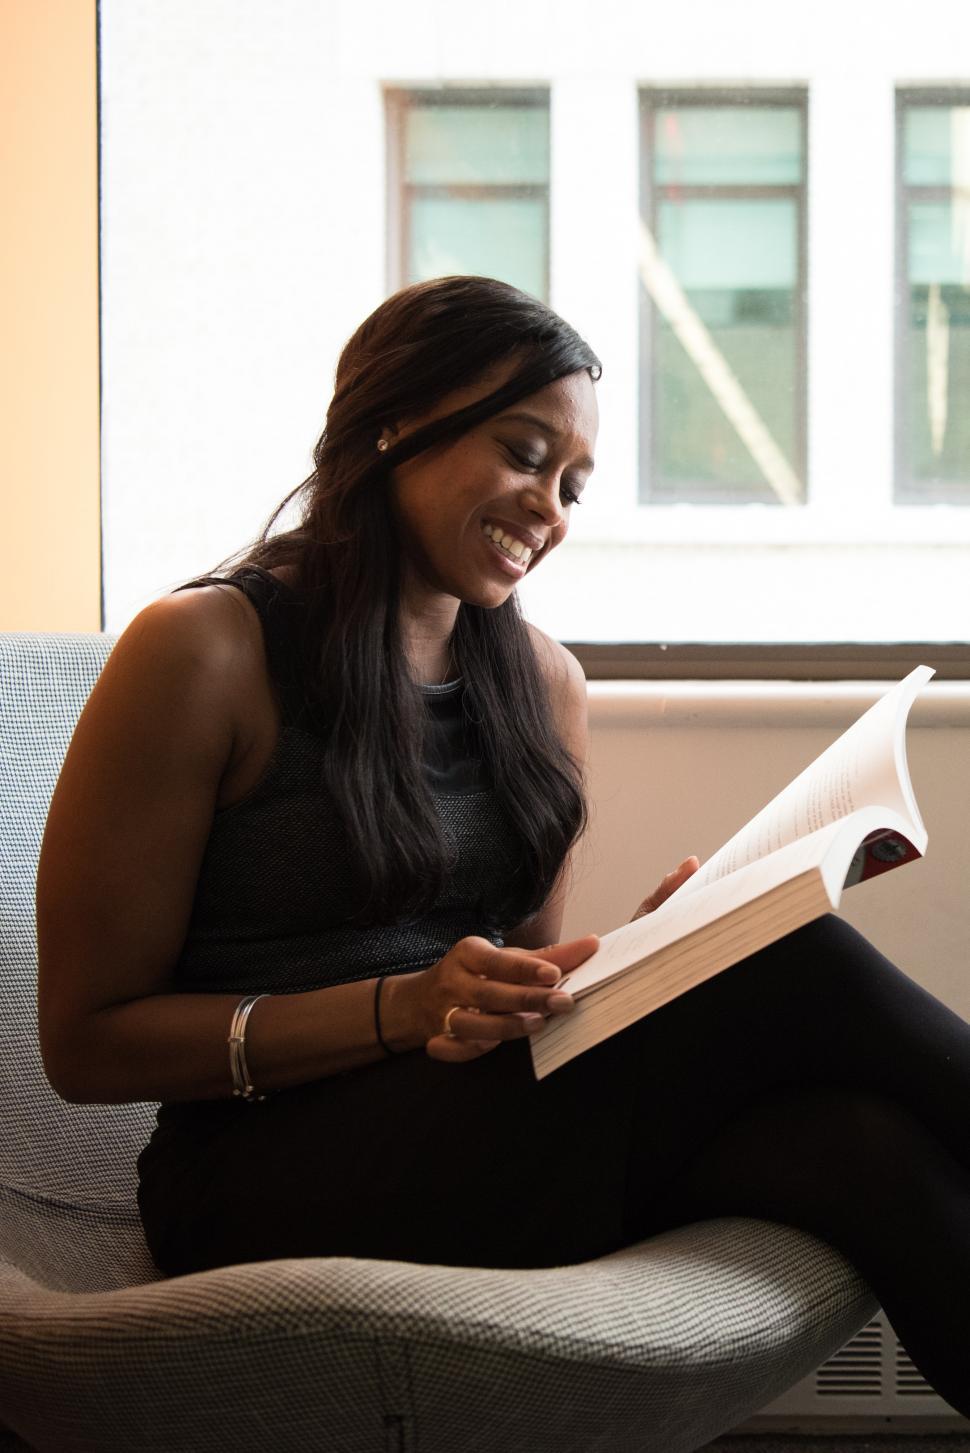 Free Image of Smiling woman with book 